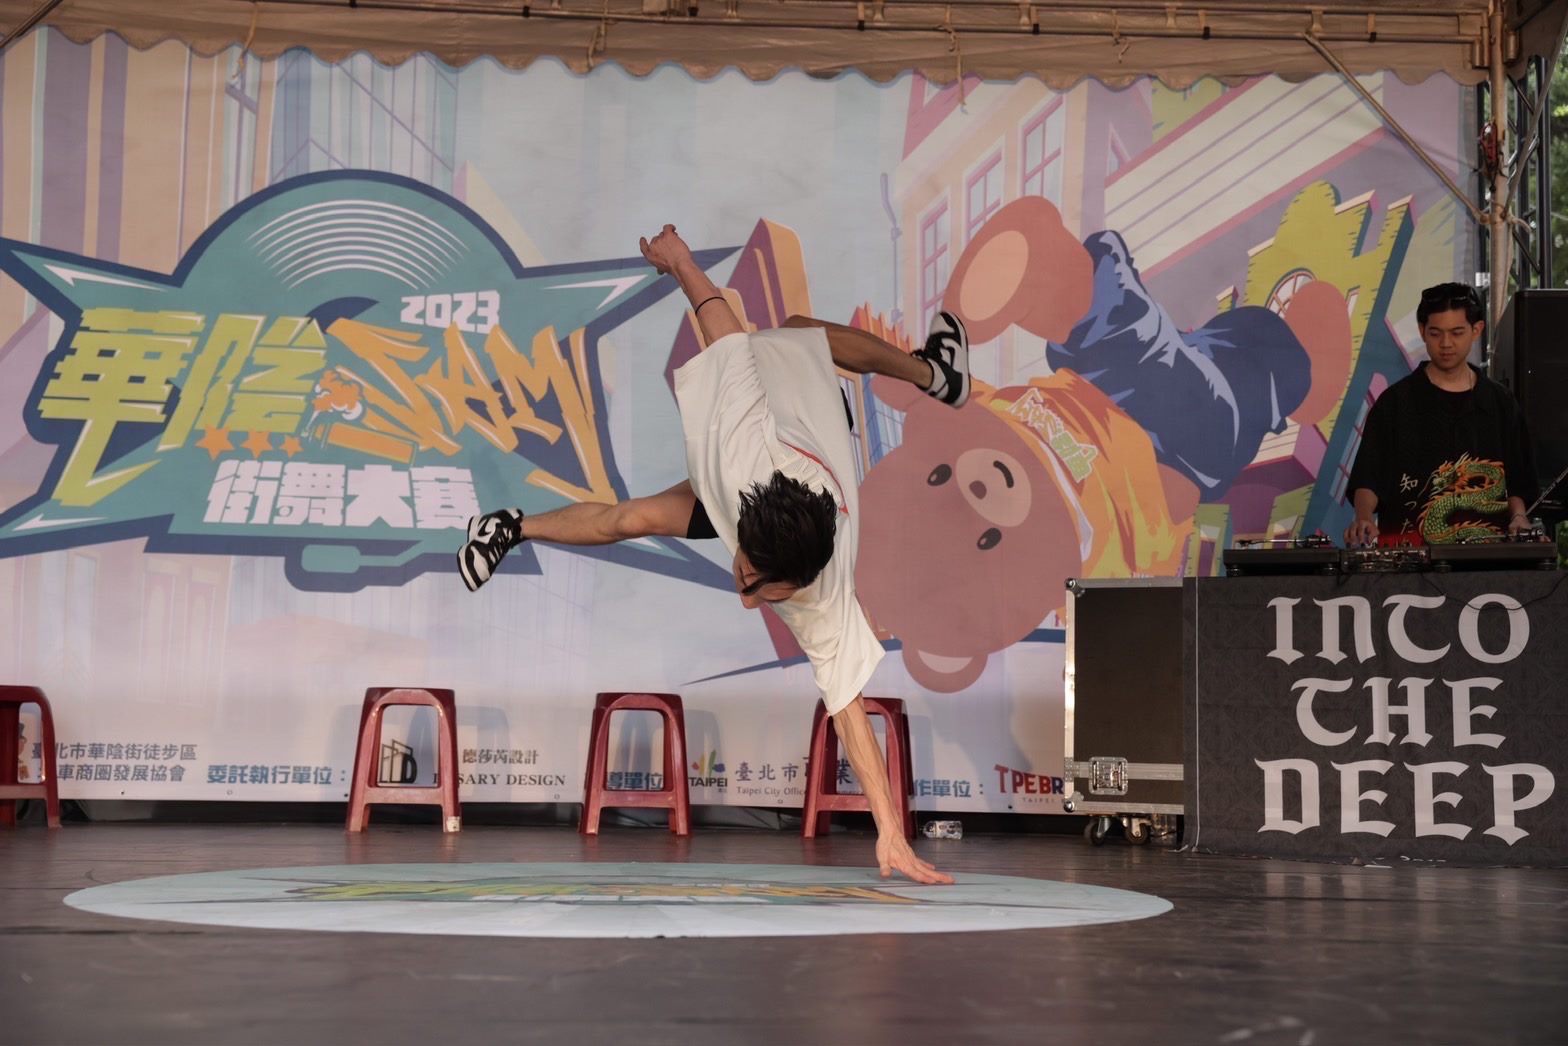 Breakdance performance at the Second Hauyin Street Dance Jam Carnival